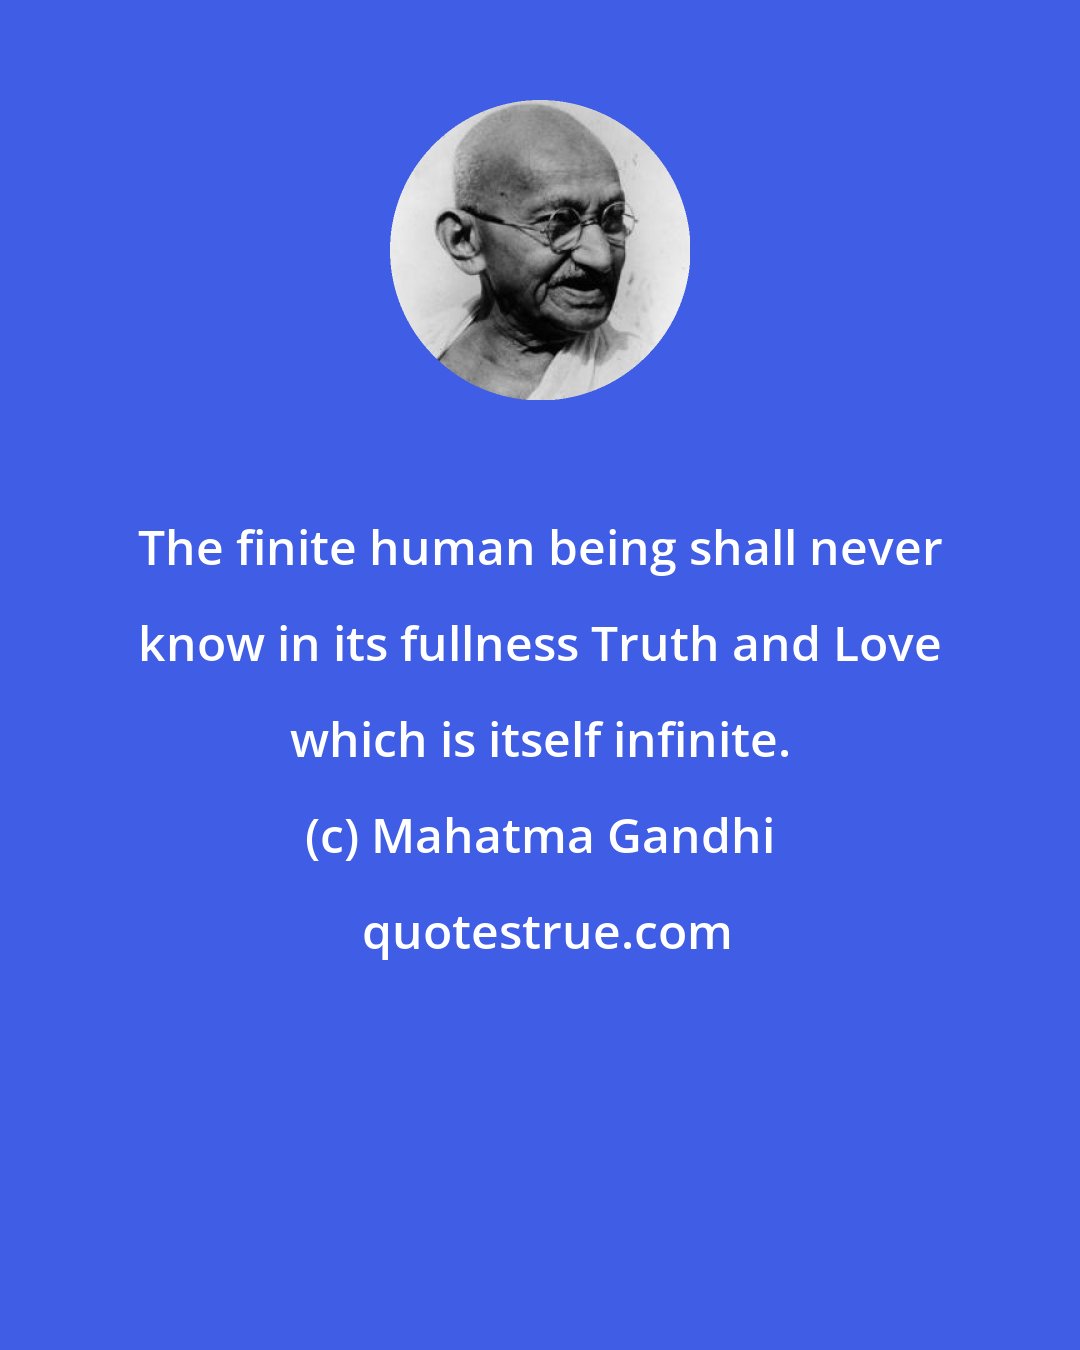 Mahatma Gandhi: The finite human being shall never know in its fullness Truth and Love which is itself infinite.